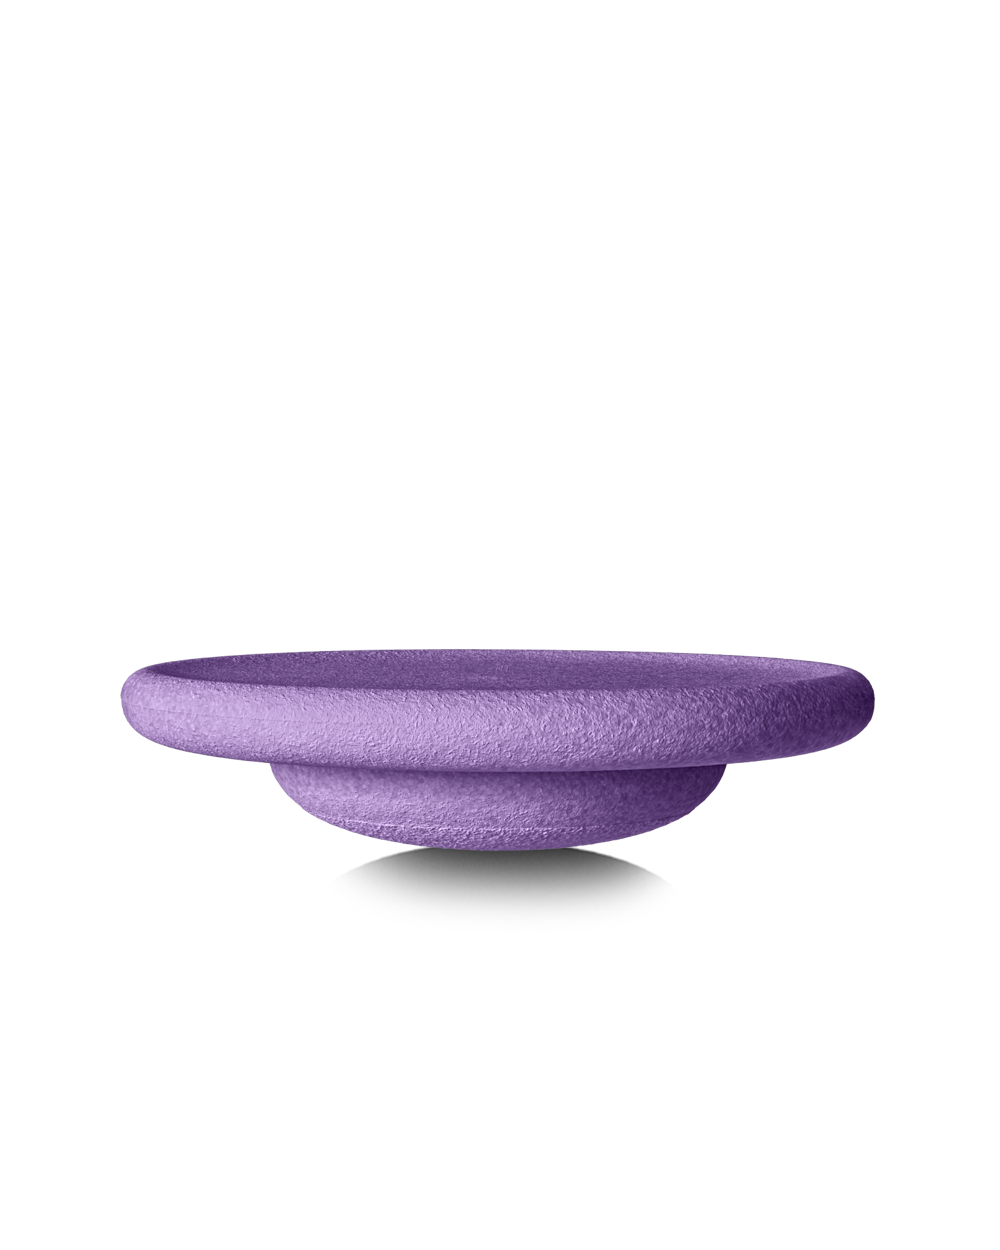 Stapelstein COLORS Balance Board Violet